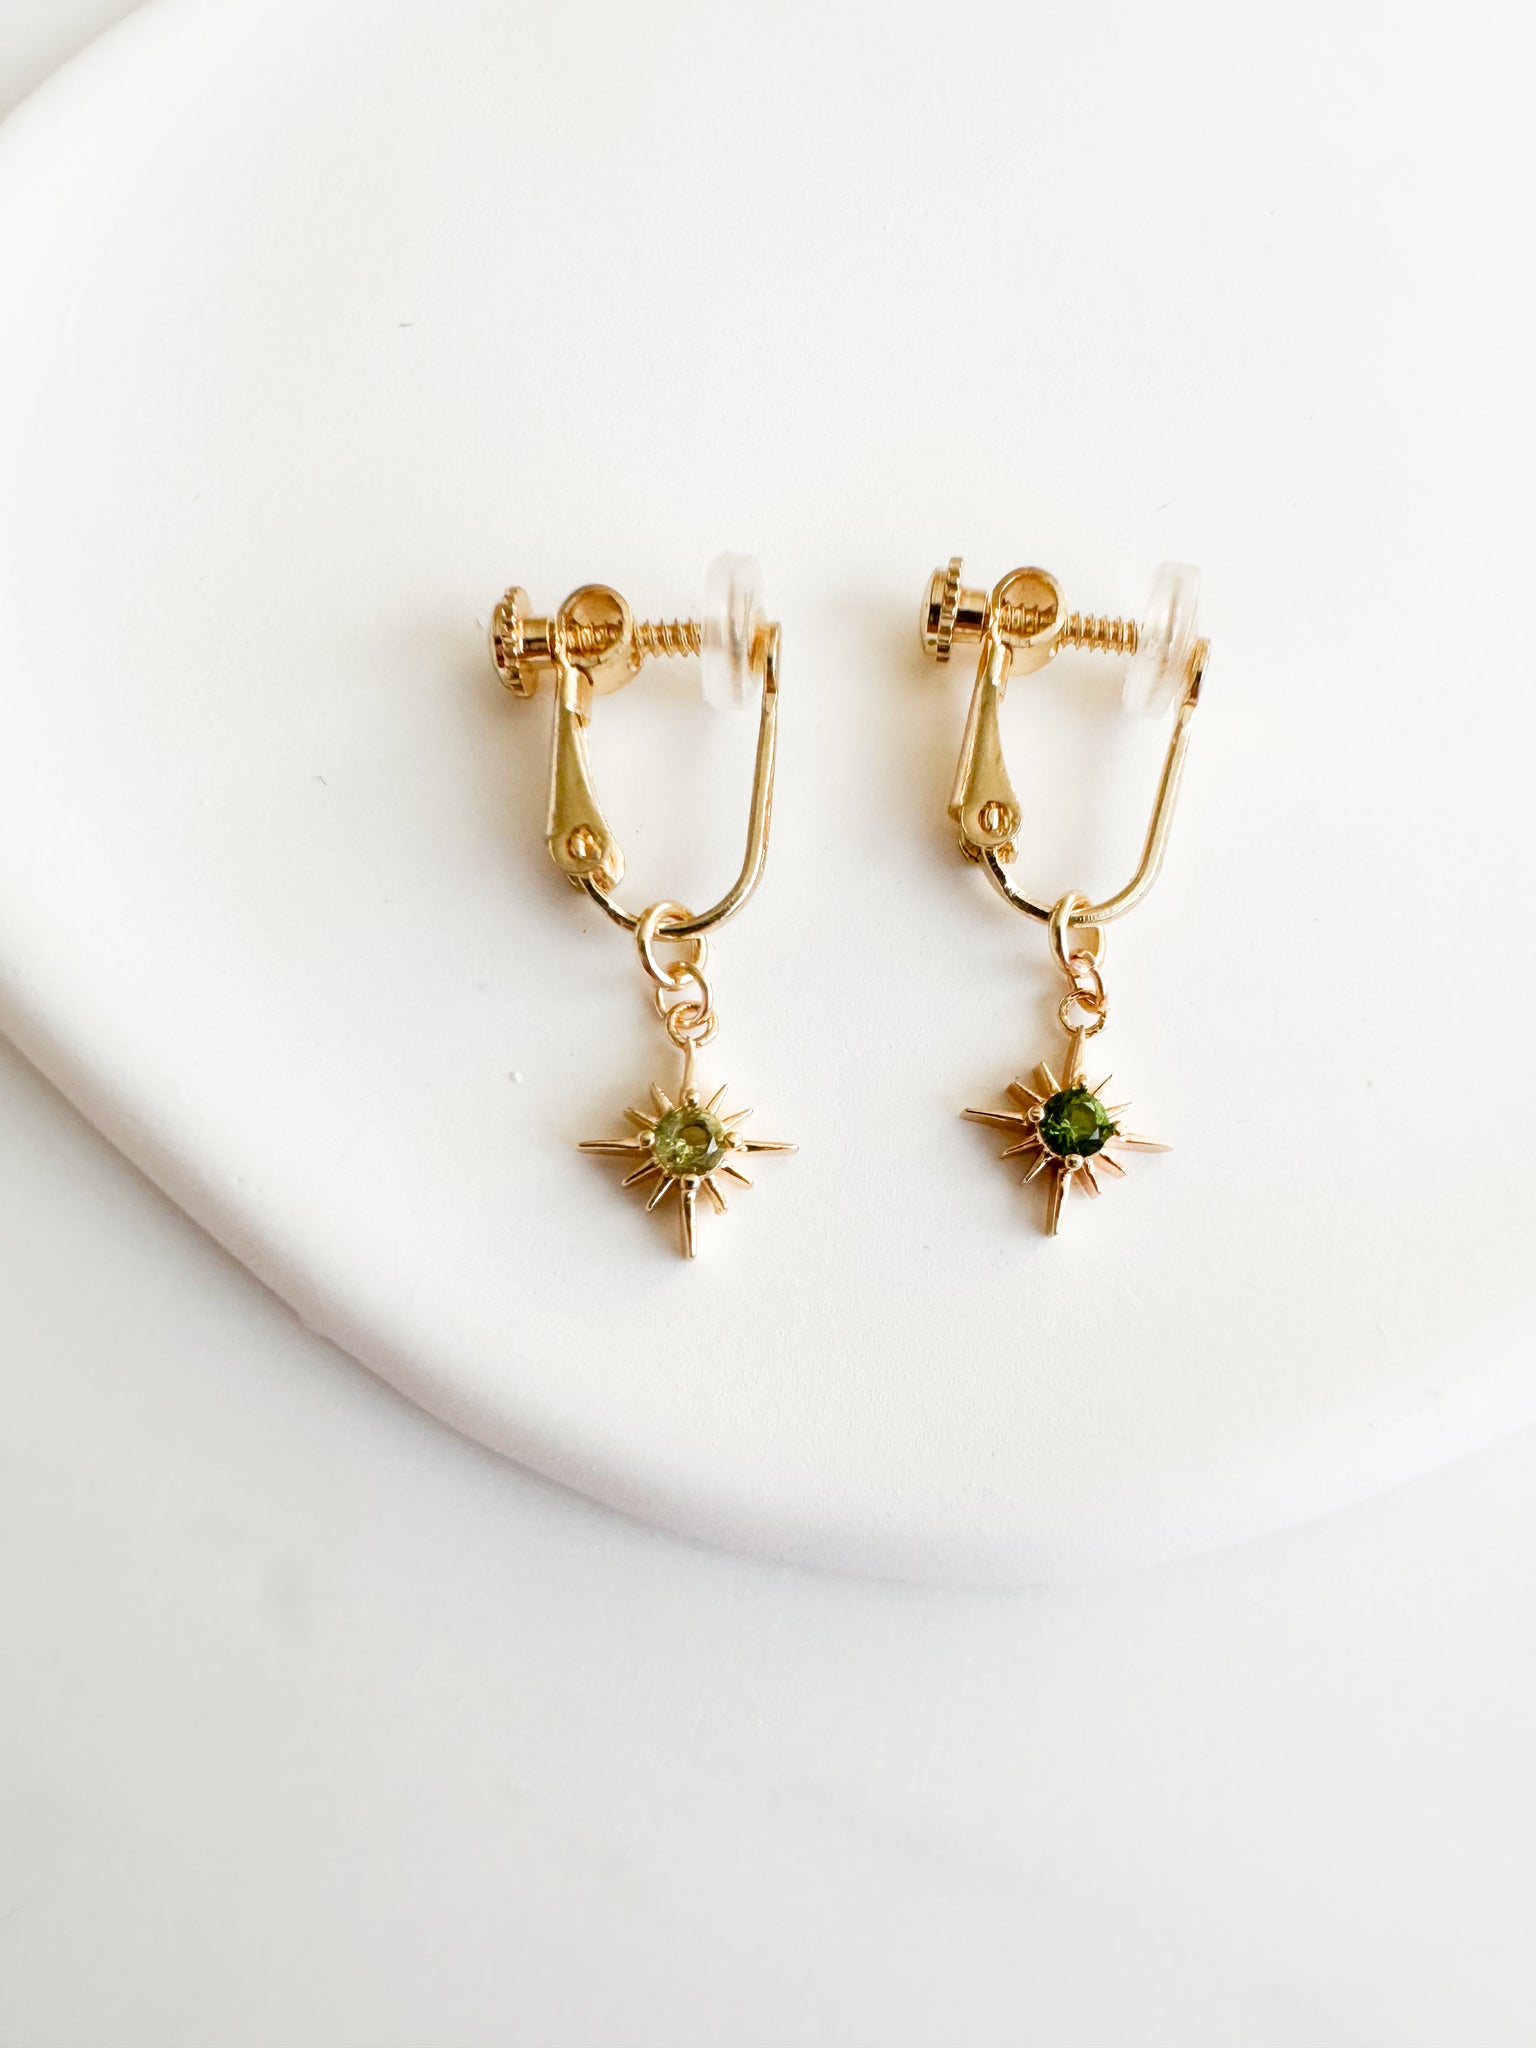 gold screwback clipon earrings with gold constellation charm with dark green circle gem in middle